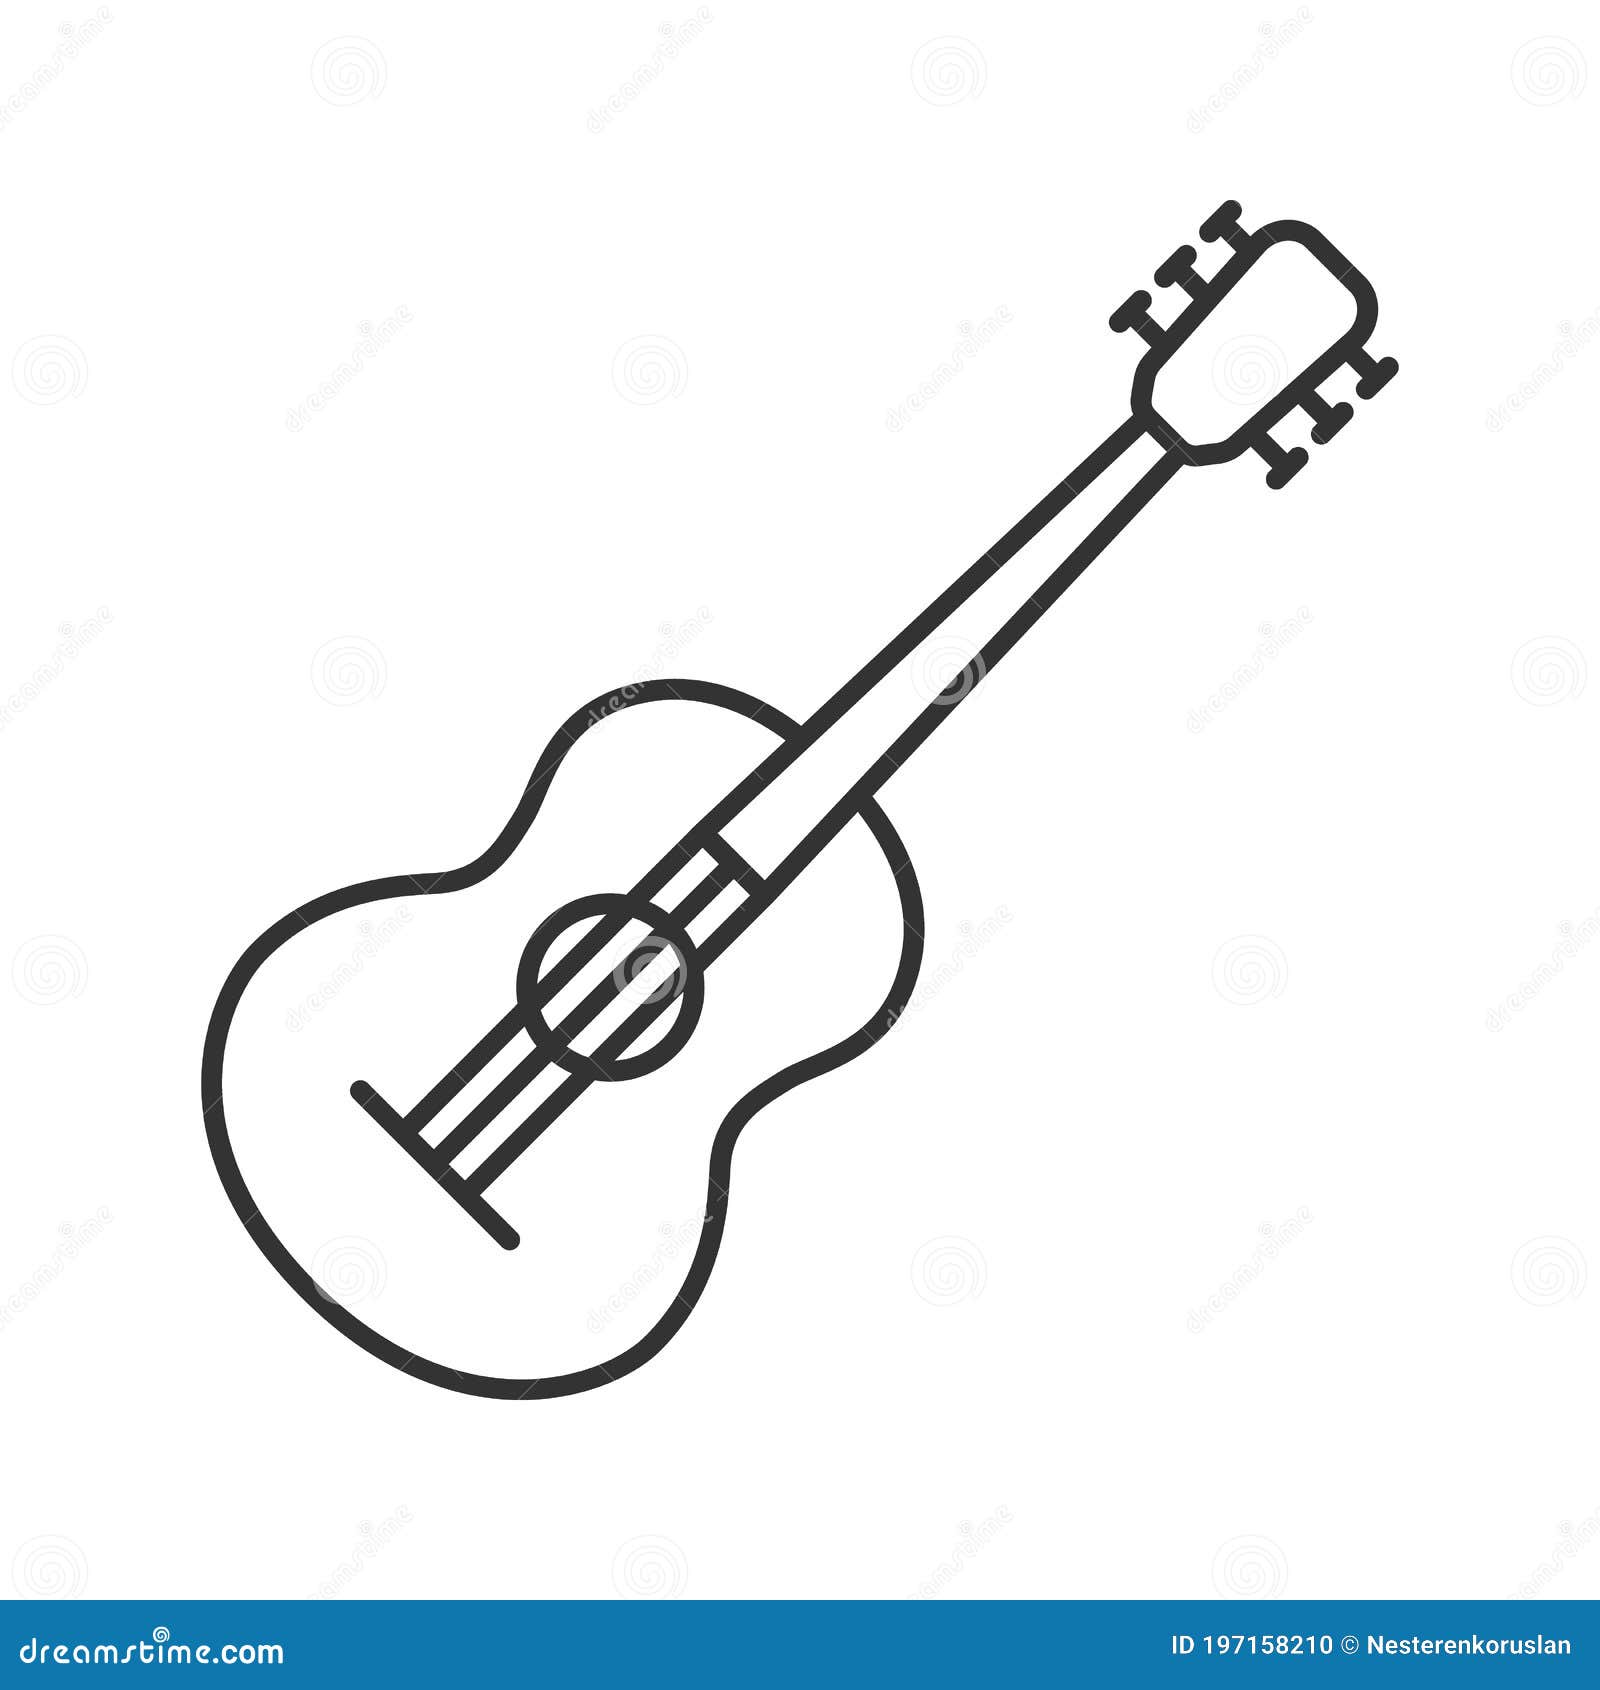 Guitar linear icon stock vector. Illustration of linear - 197158210